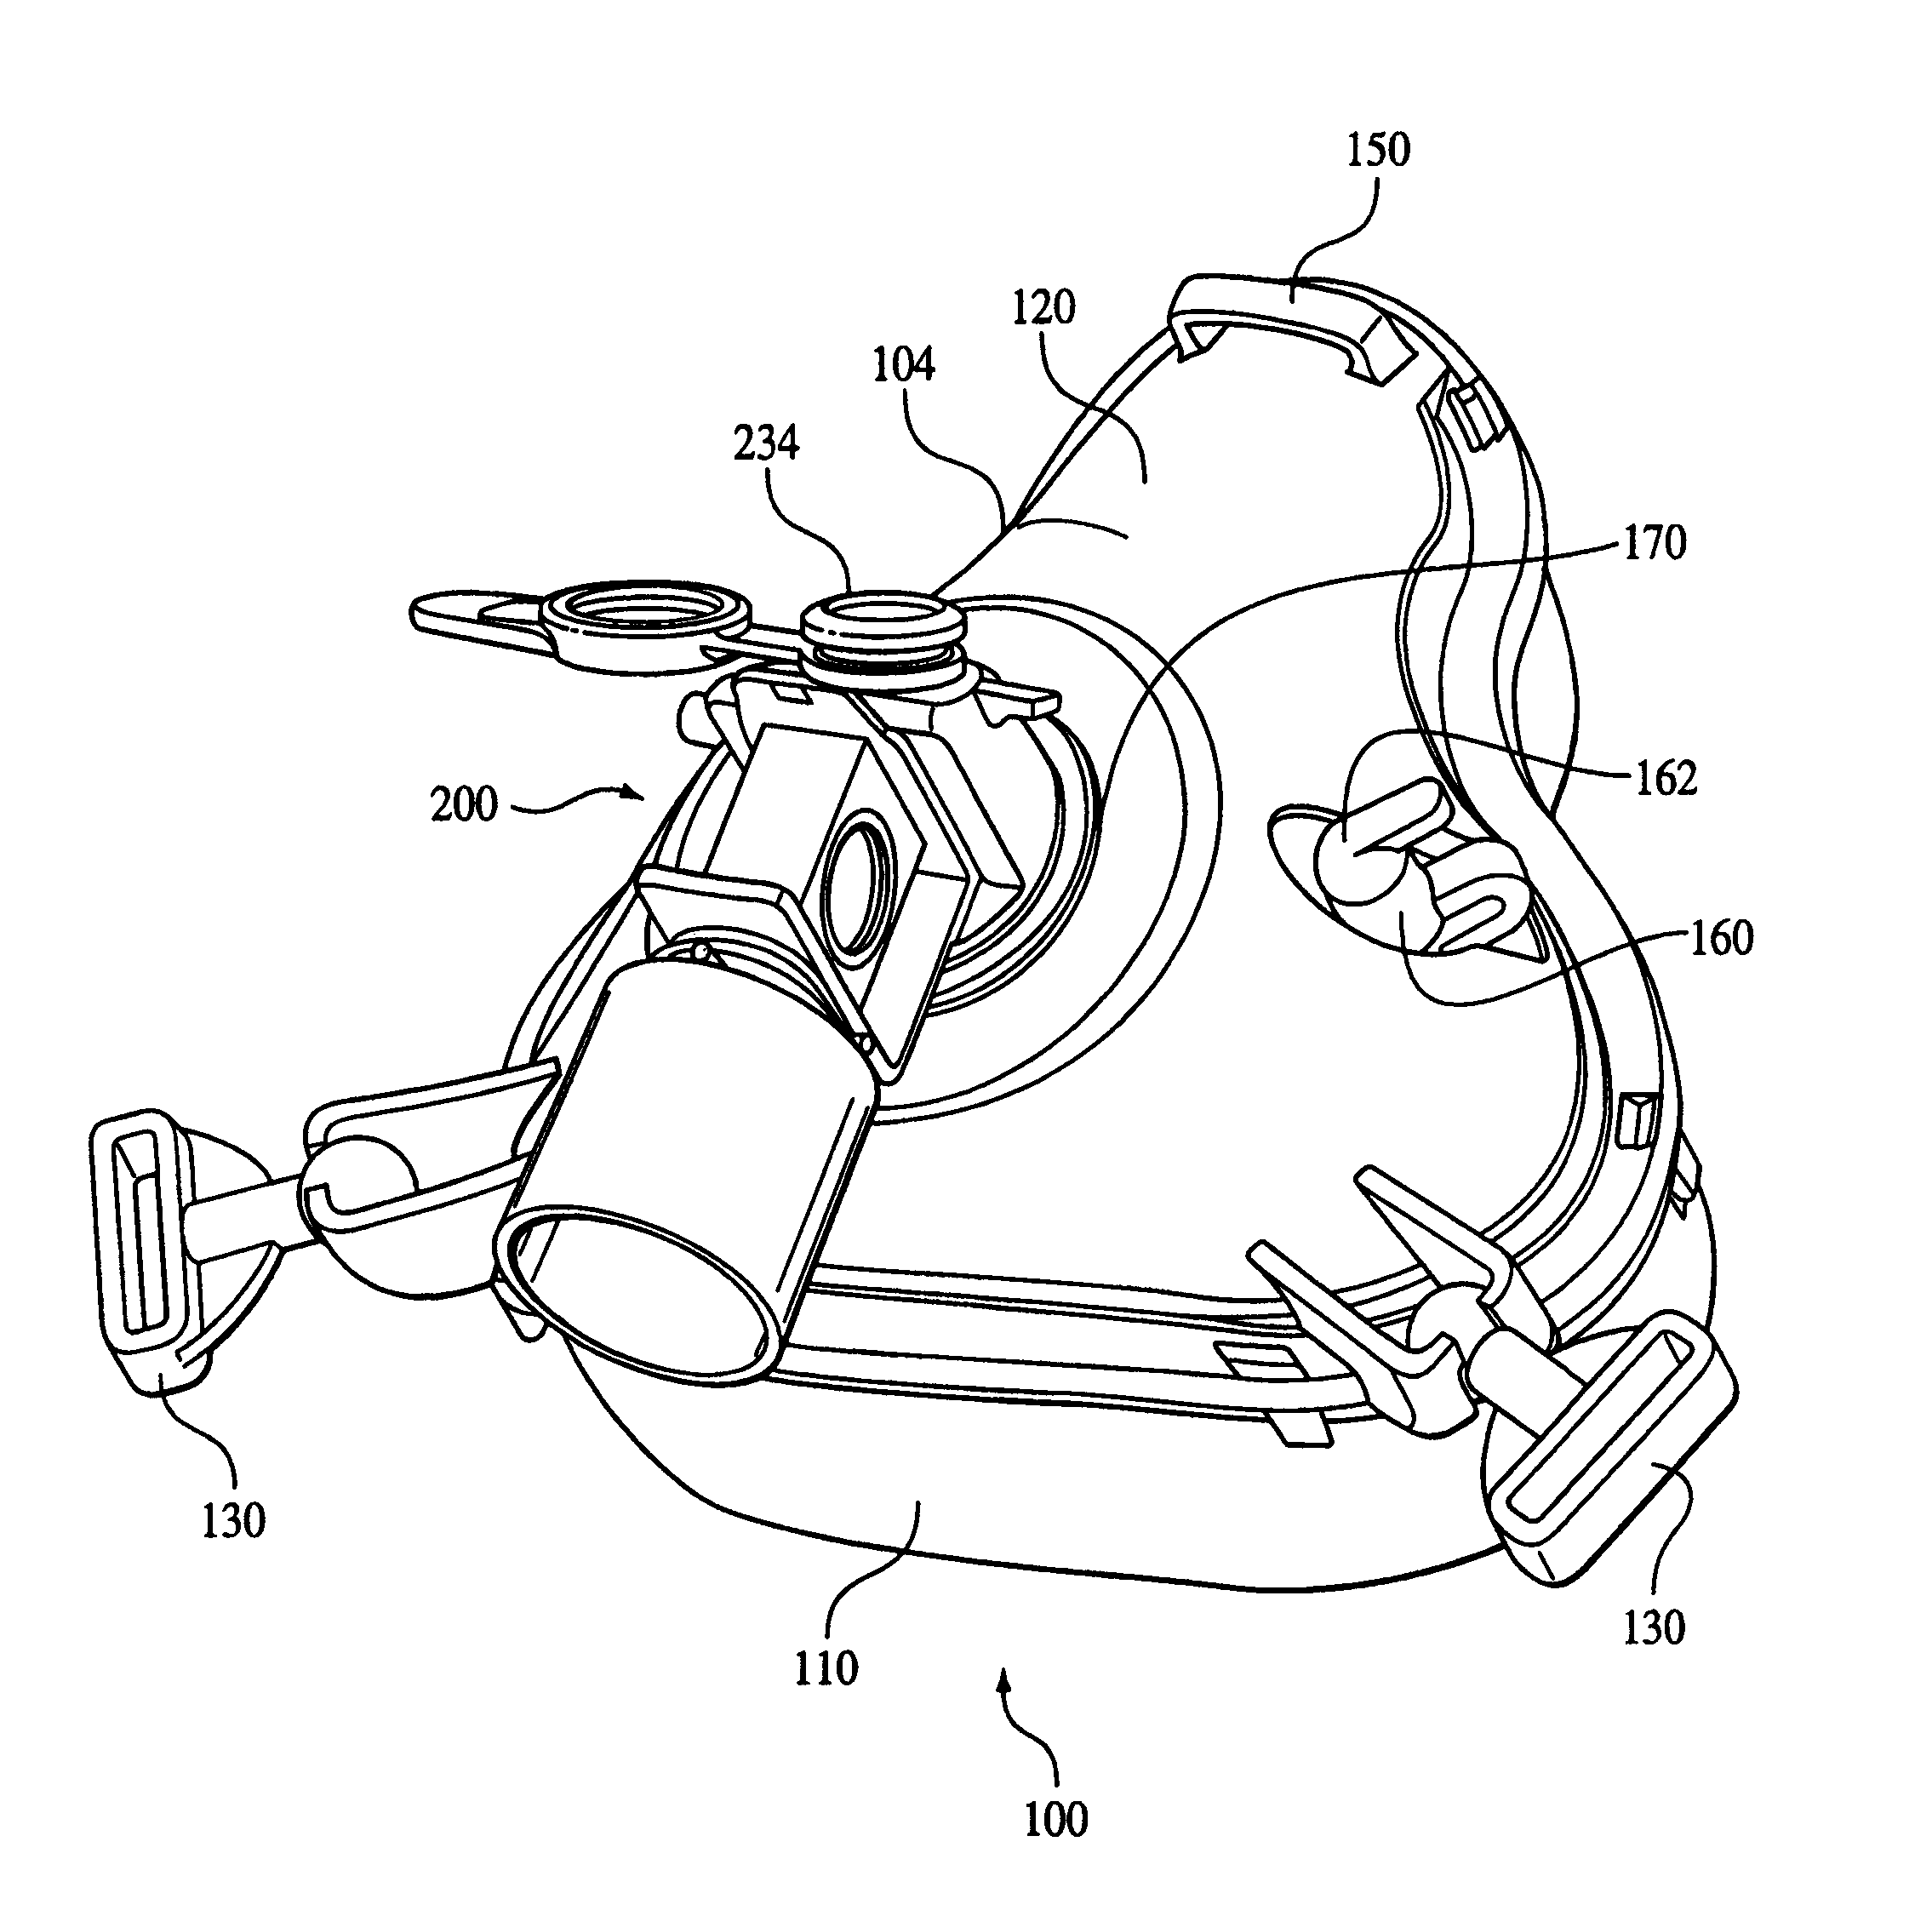 Patient interface with respiratory gas measurement component